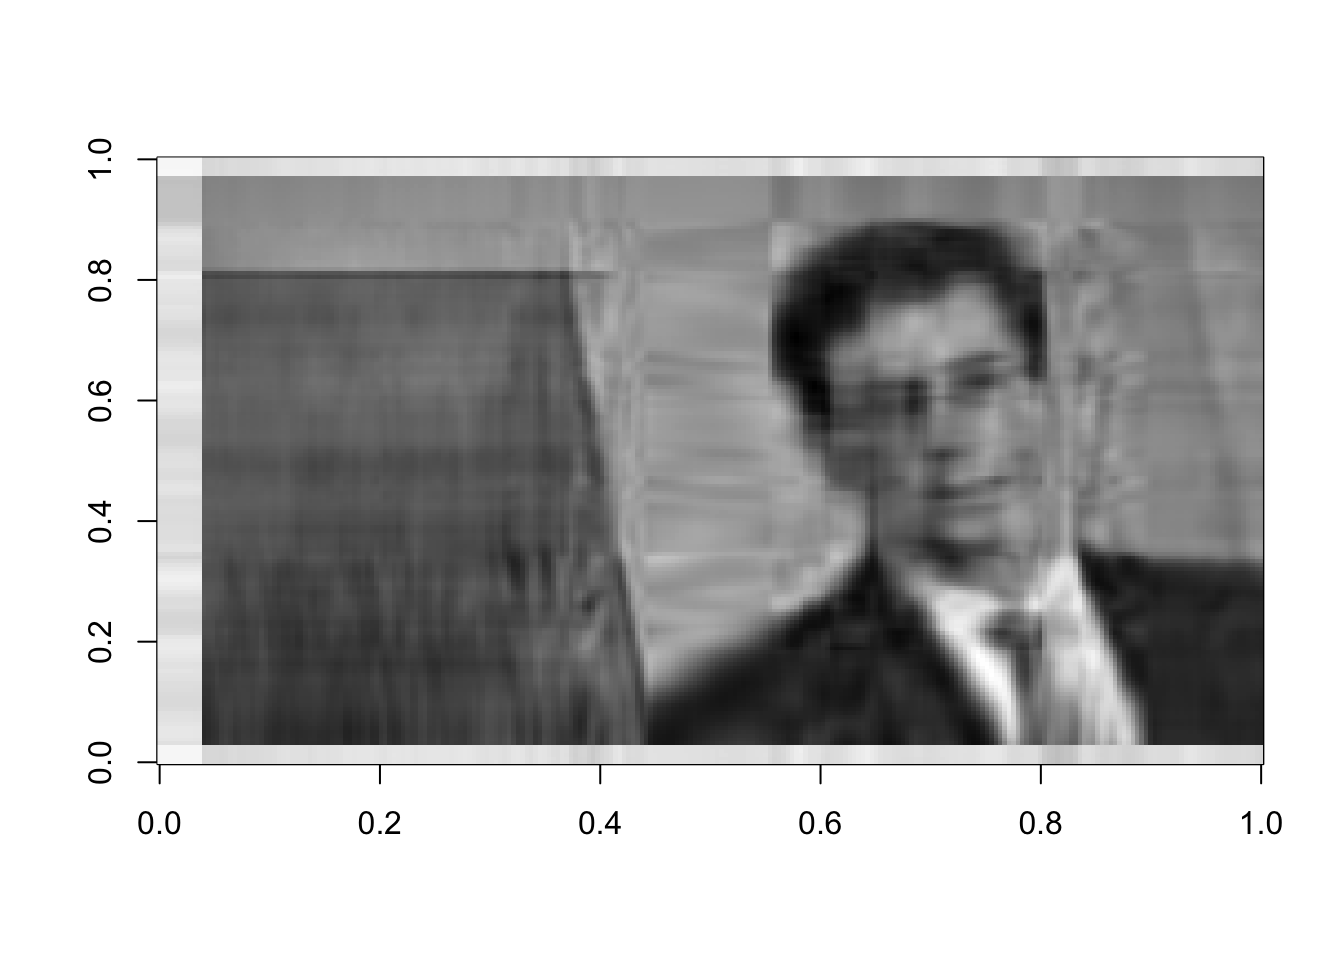 Rank 10 approximation of the image data